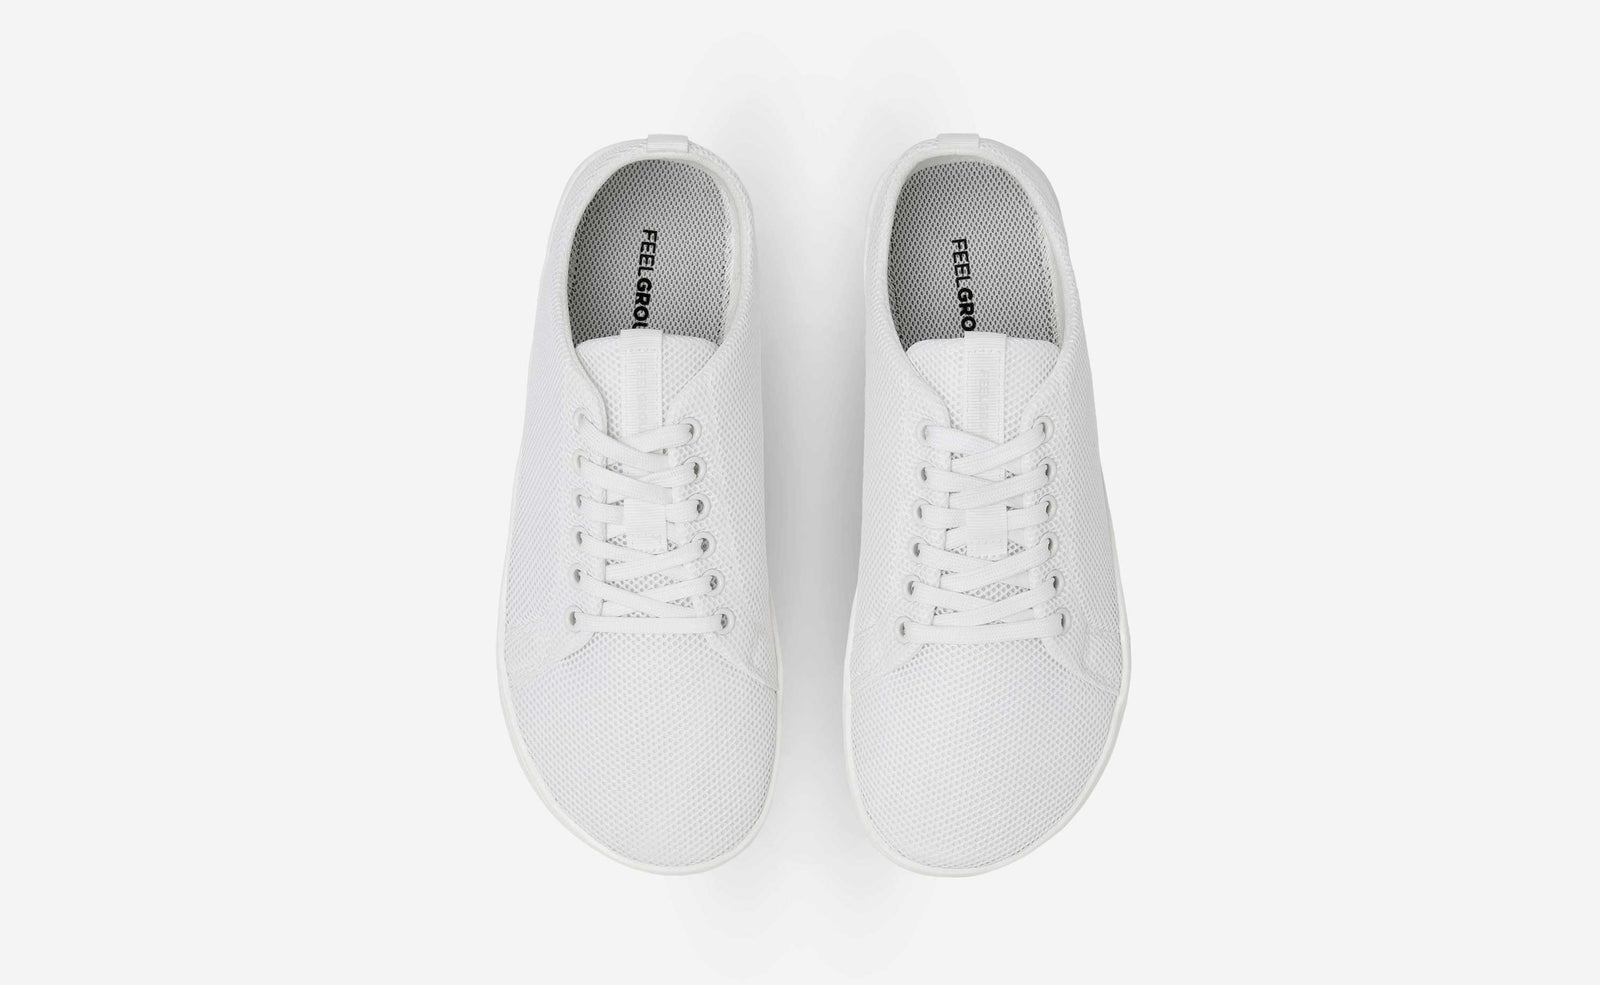 Feelgrounds Courtside, Barefoot Shoes, Faux Leather, Casual Minimal Sneakers, Zero Drop, Wide Toe Box, Vegan, Unisex | All White US M10